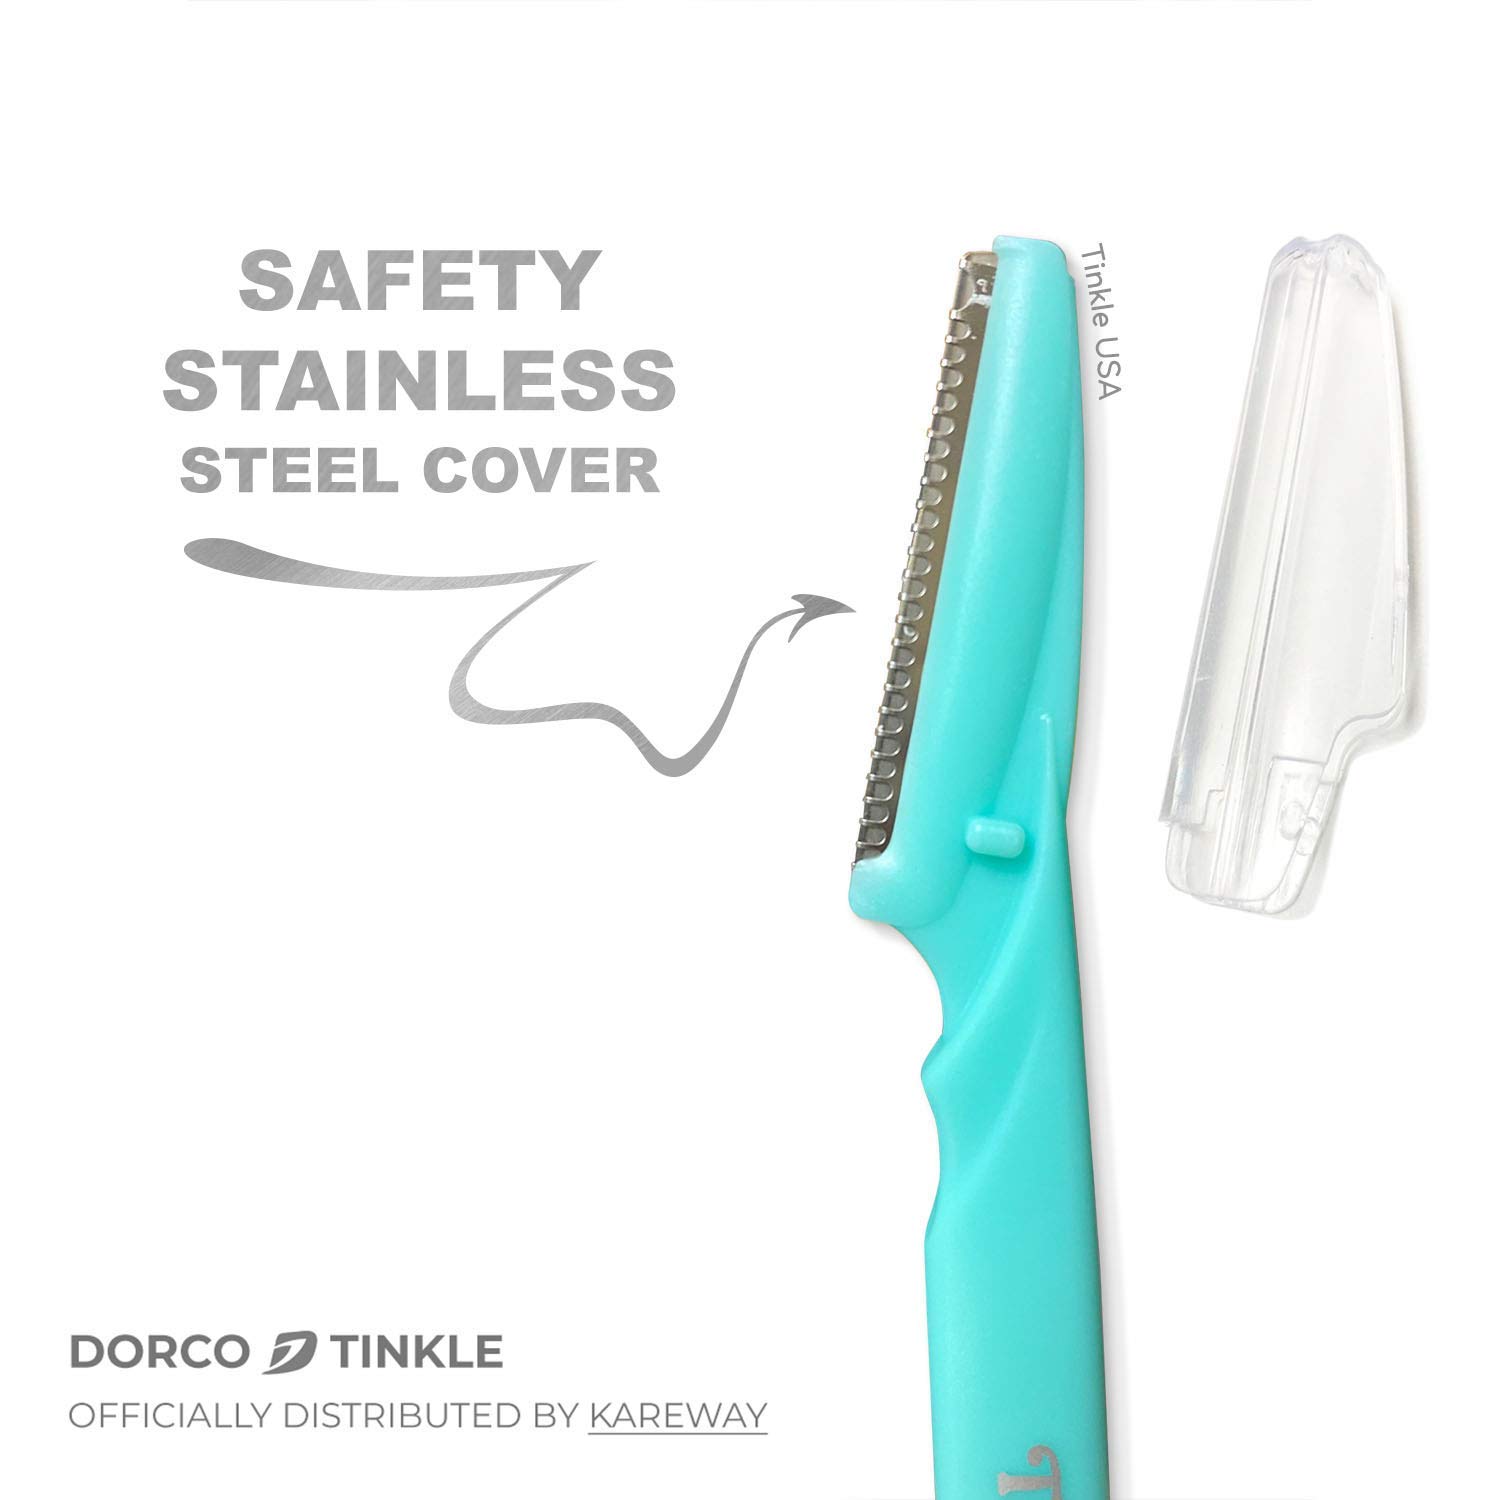 Dorco Tinkle Eyebrow Razors for Women, 6 Razors , Eyebrow Trimmer Dermaplaning Tool for Safe and Easy Facial Hair Removal for Women, Exfoliating Face With Stainless Steel Safety Cover for Sensitive Skin